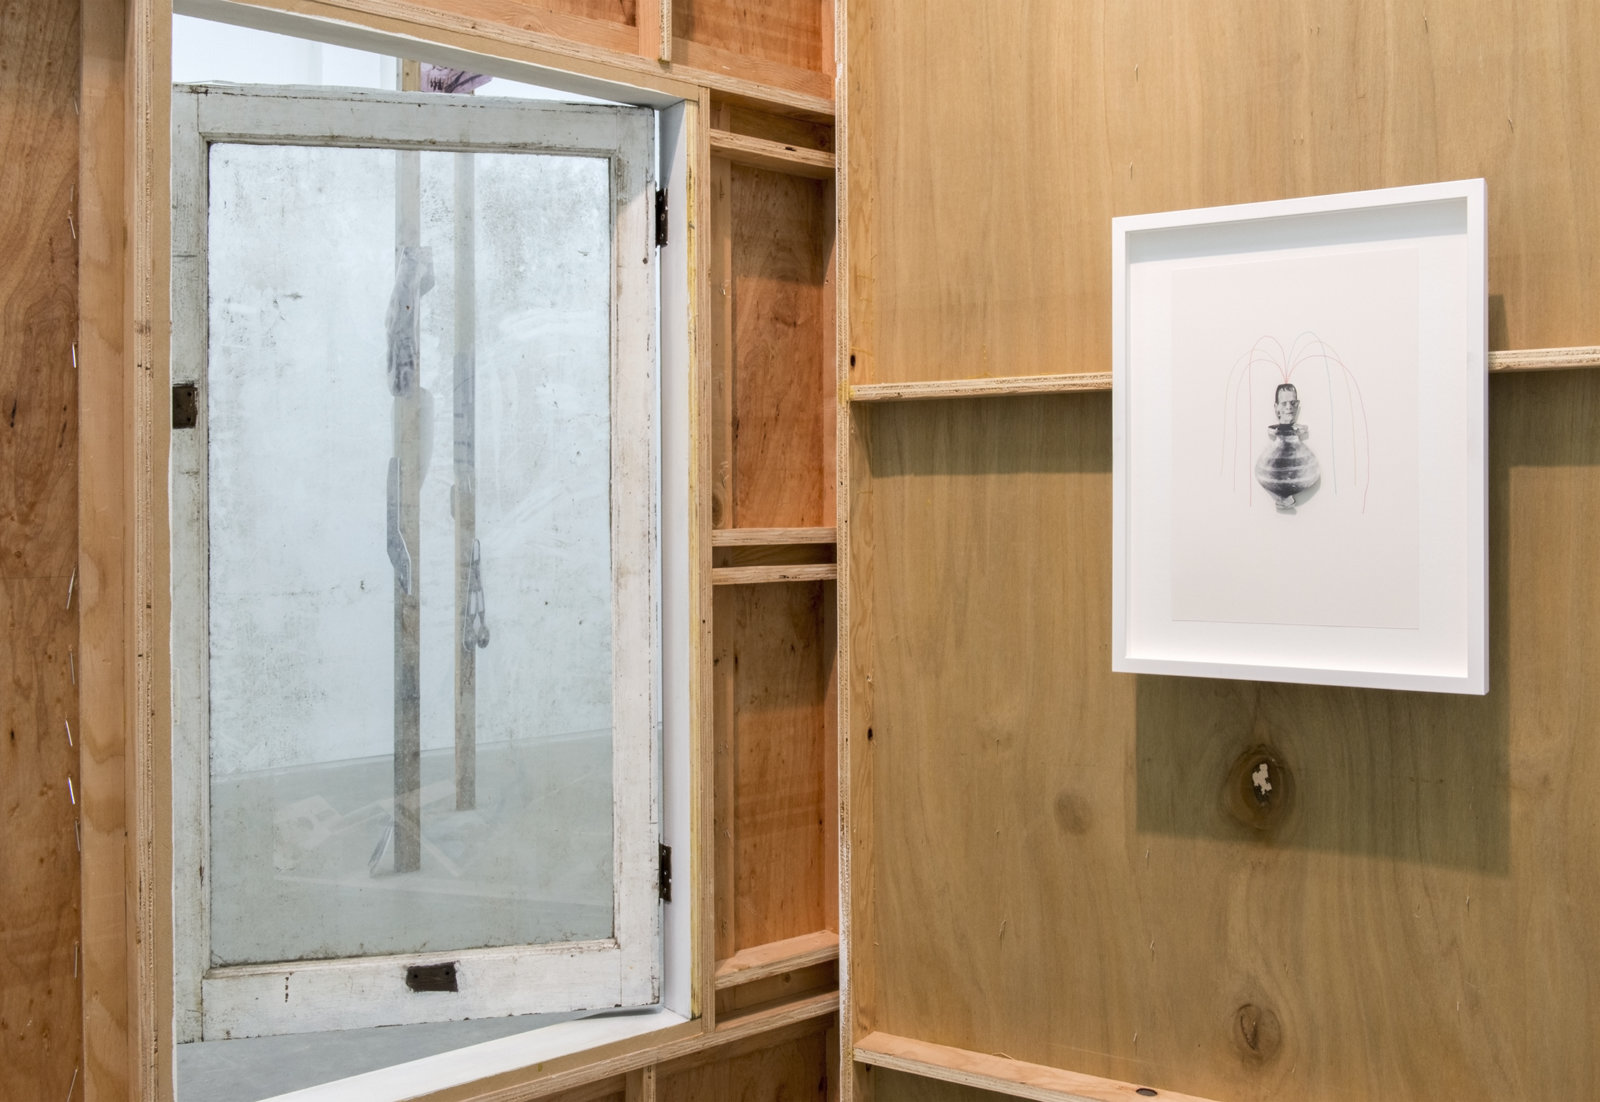 Geoffrey Farmer, Workbooks with When I got fired from that Beckett Play (Fountain) (detail), 2014, vitrine with 5 cut-outs collaged on foamcore, 2 wooden wall façades, paint, window, sandbags, framed cut-outs and ink mounted on paper, dimensions variable